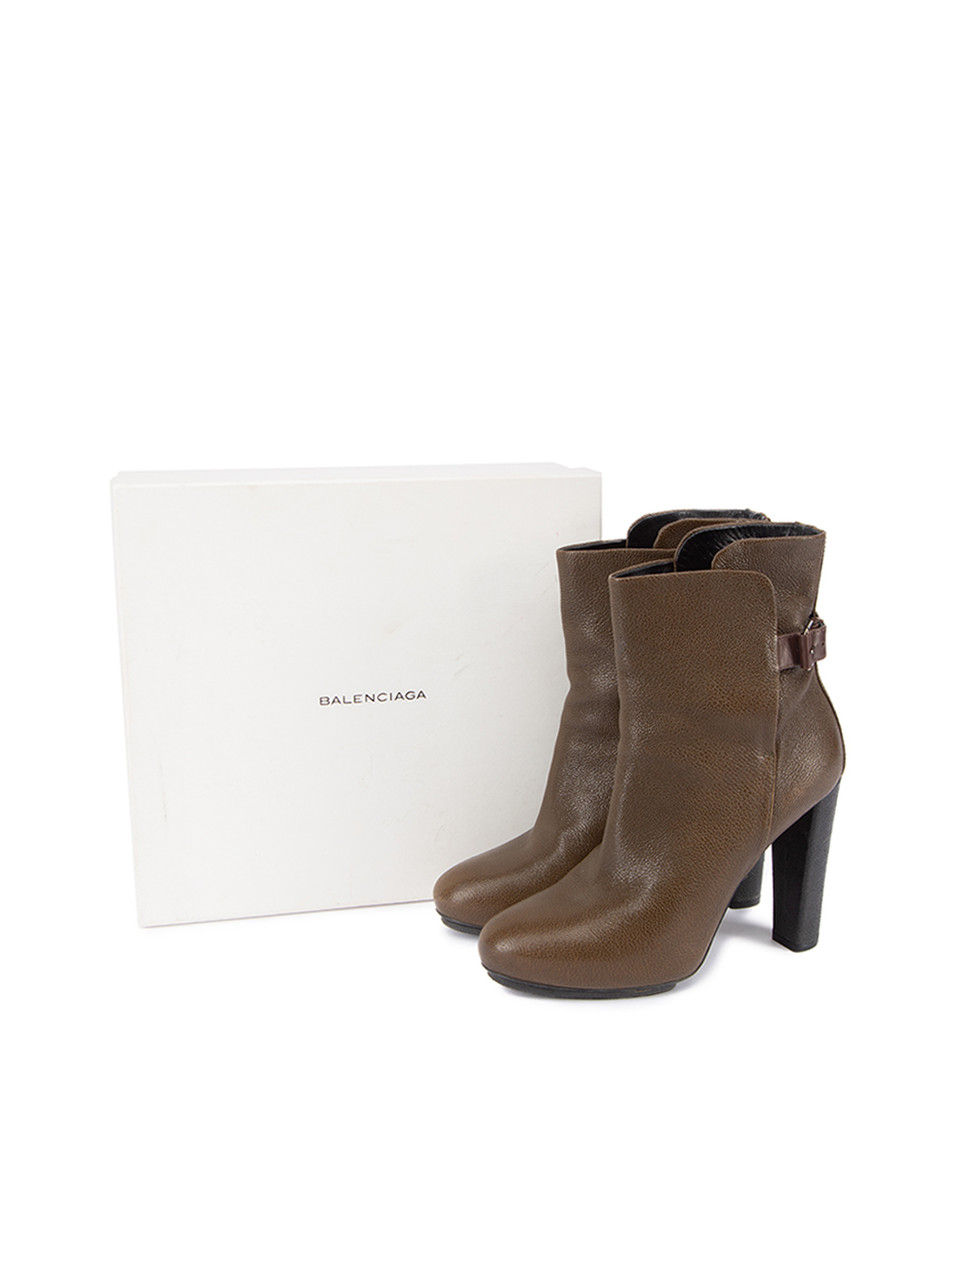 Balenciaga Brown Buckle Accent Heeled Ankle Boots